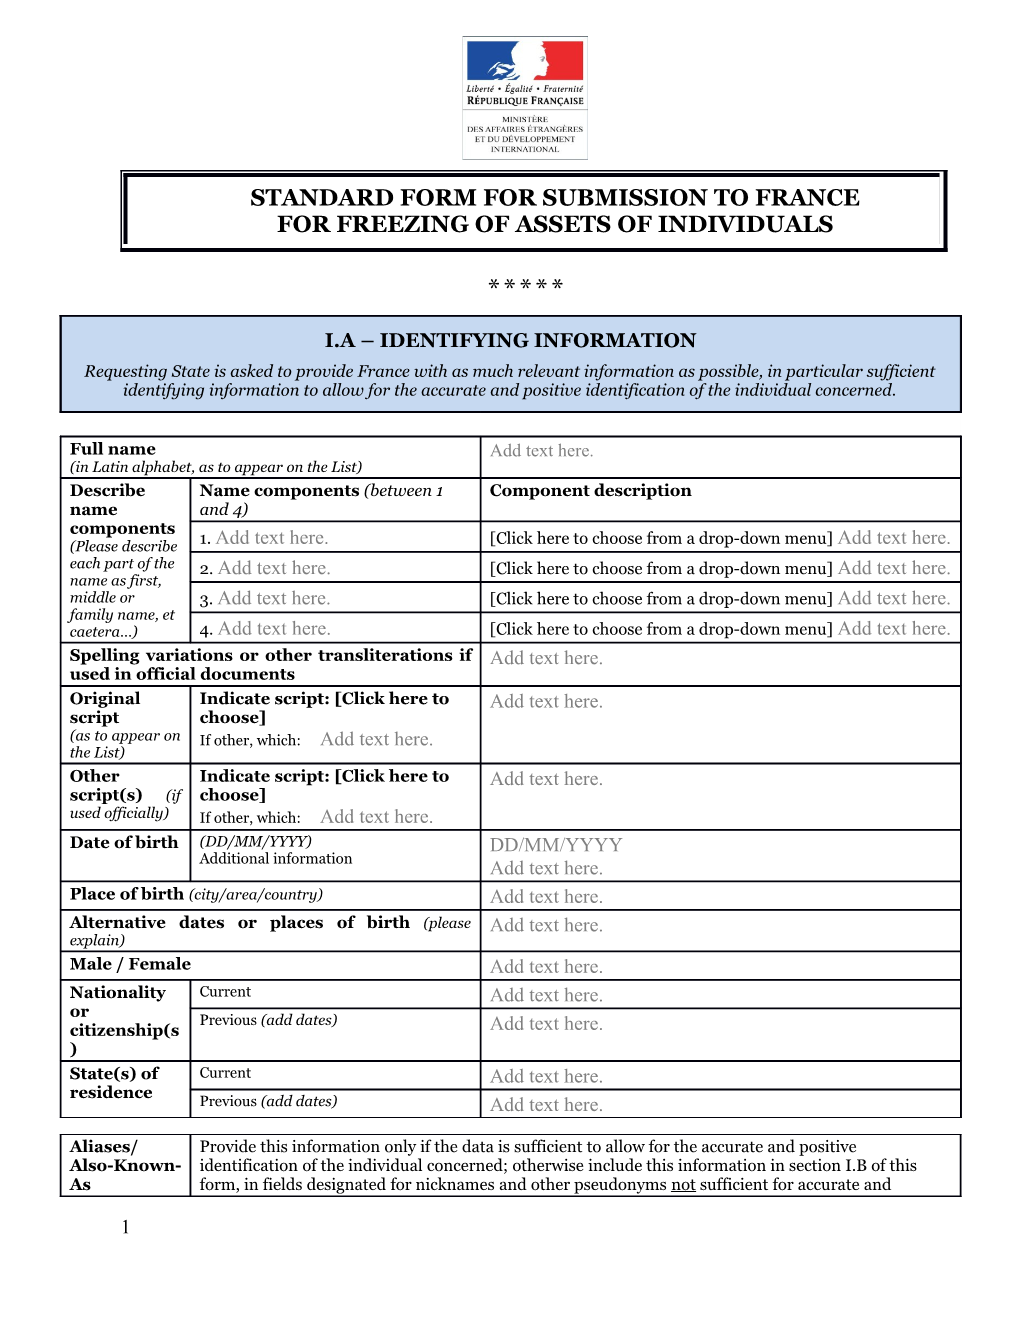 Consolidated List: Standard Form for Member State Submissions to the Committee for Listing